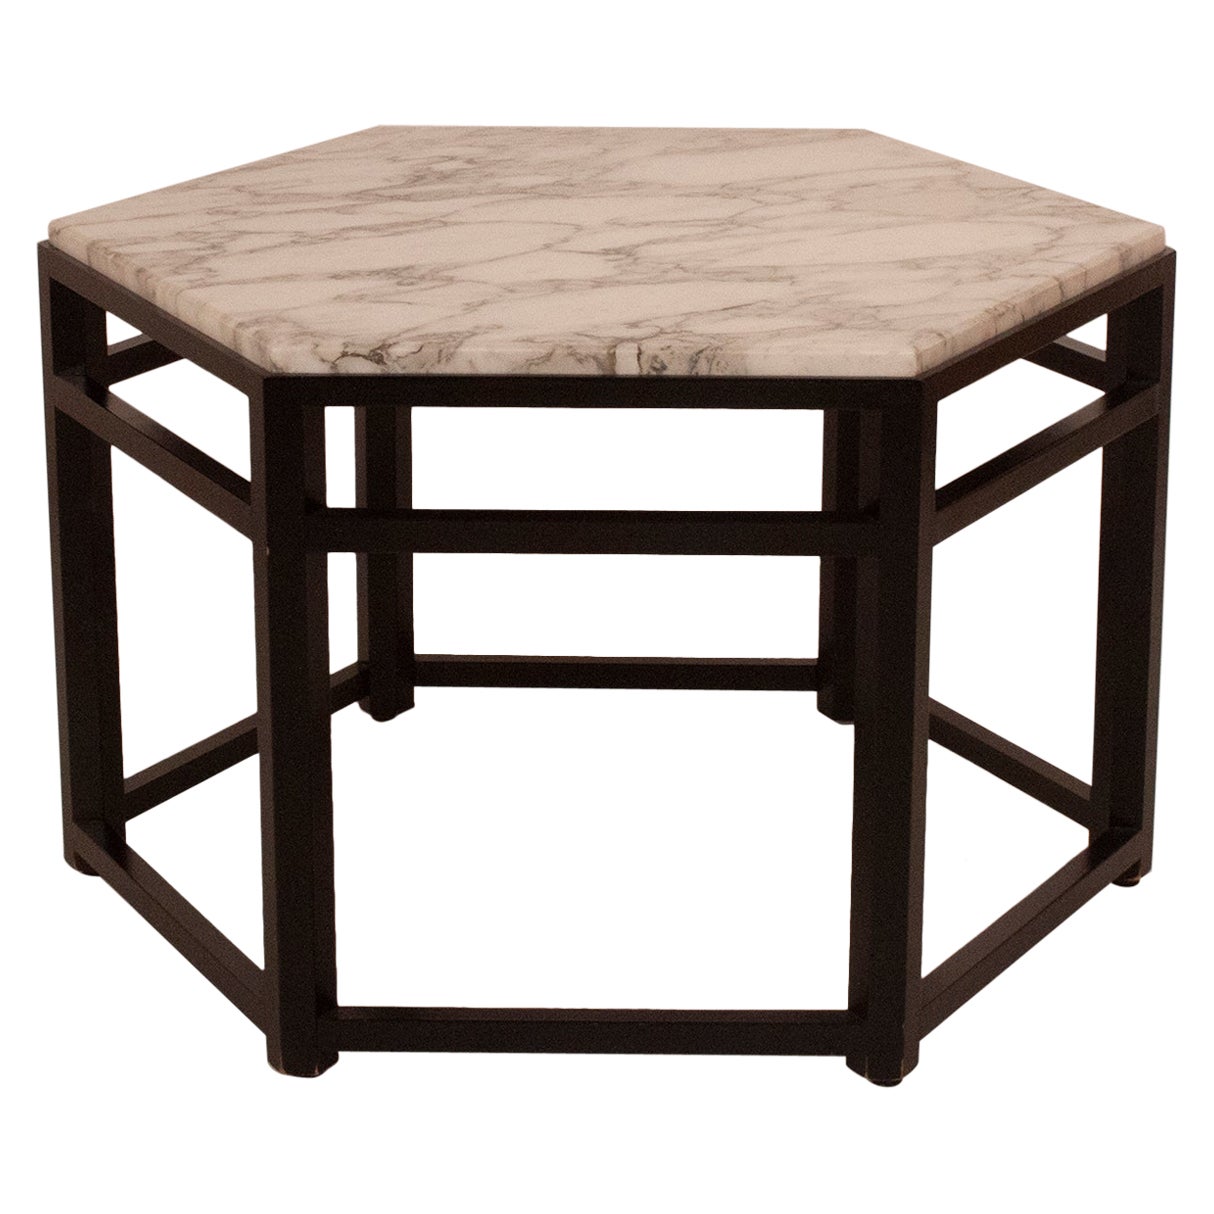 Mid-century Modern Italian Side Table in White Marble and black structure, 1970s